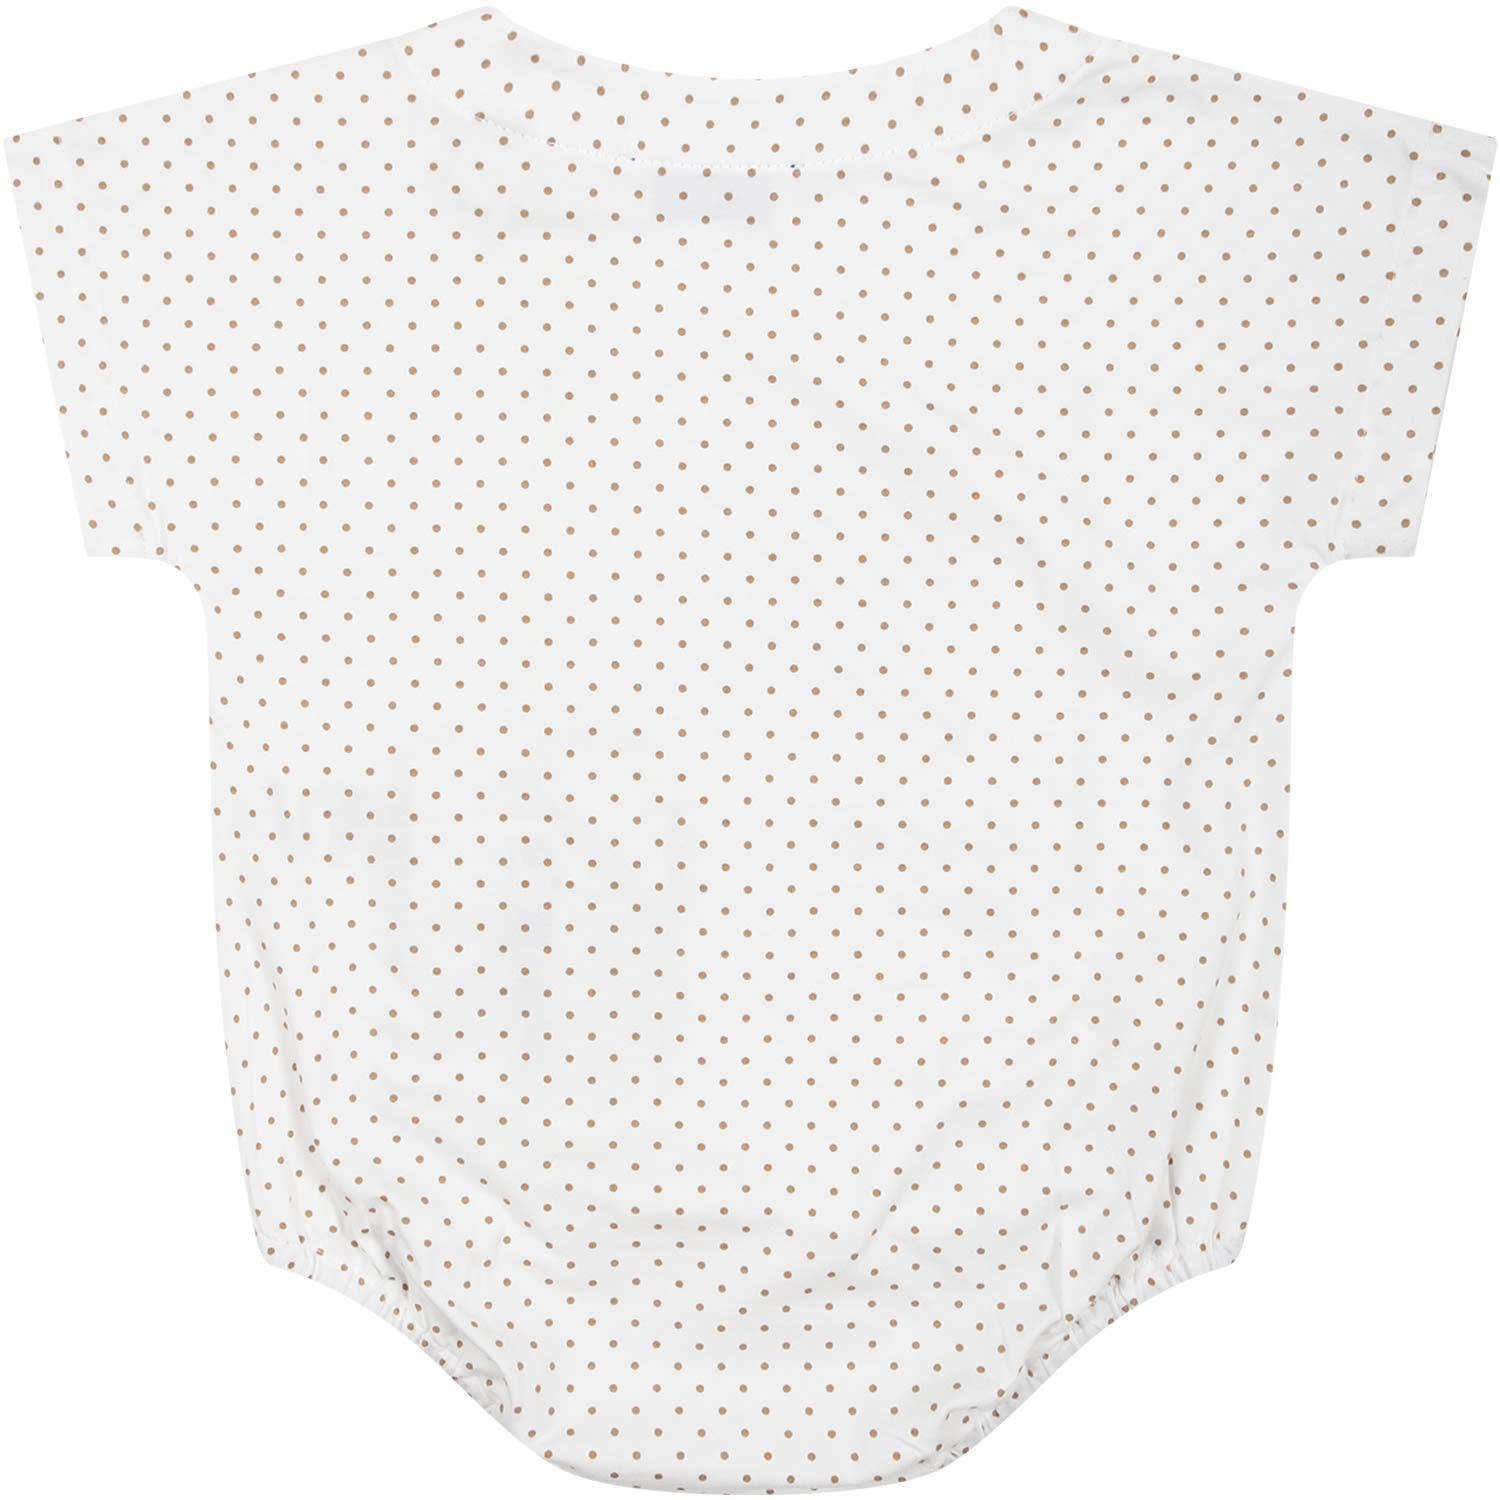 Shop Burberry White Babies Outfit With All-over Logo And Polka Dots